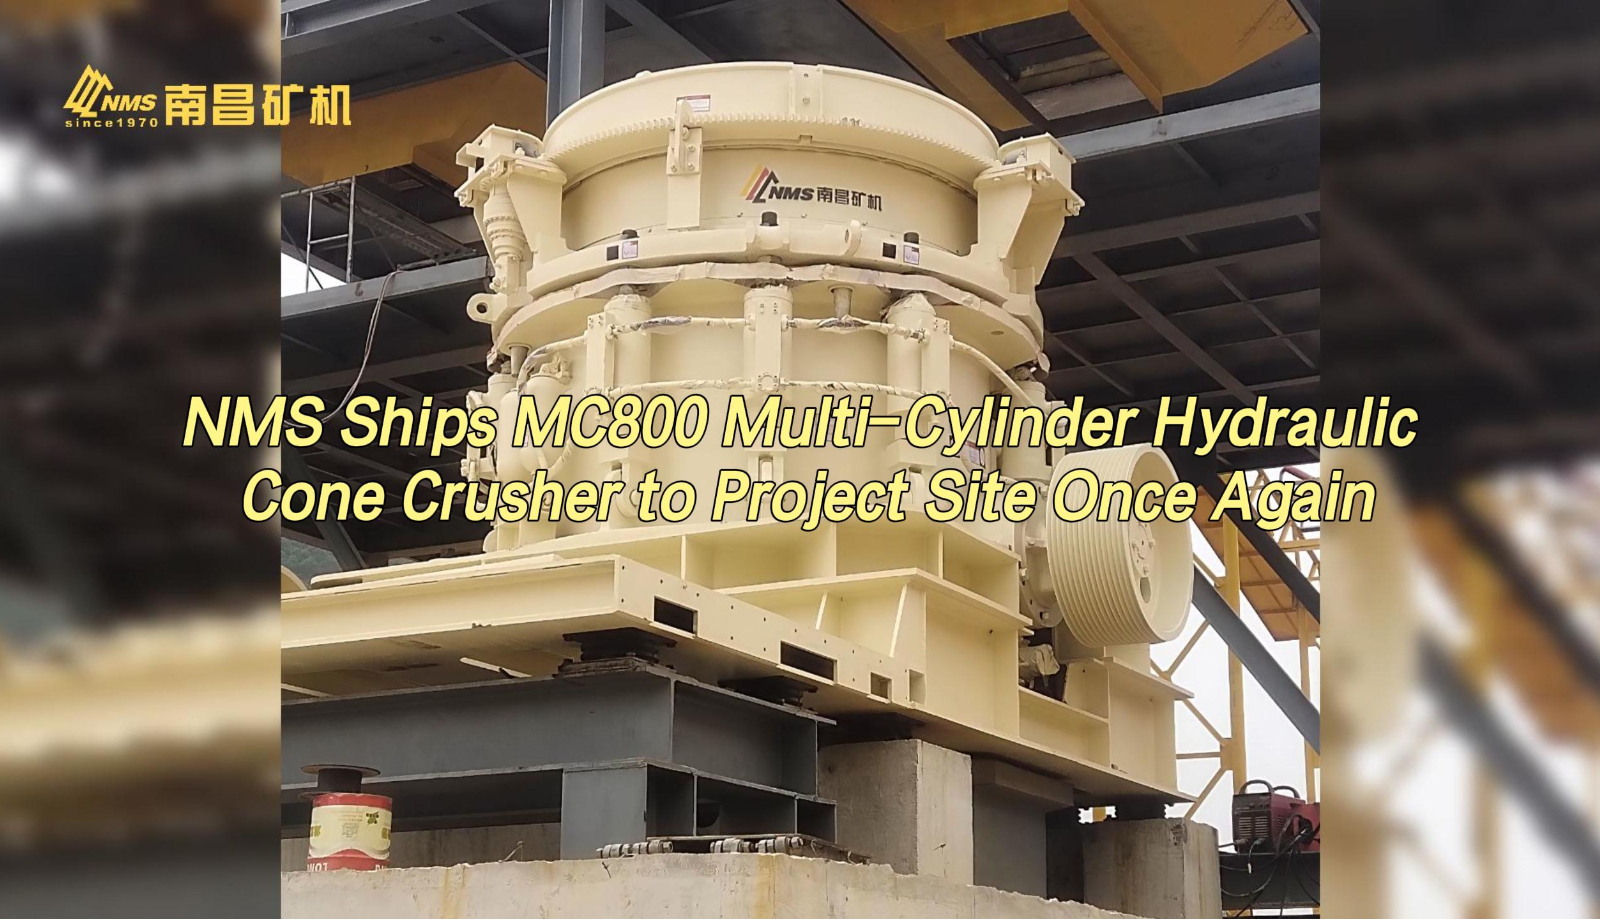 NMS Ships MC800 Multi-Cylinder Hydraulic Cone Crusher to Project Site Once Again